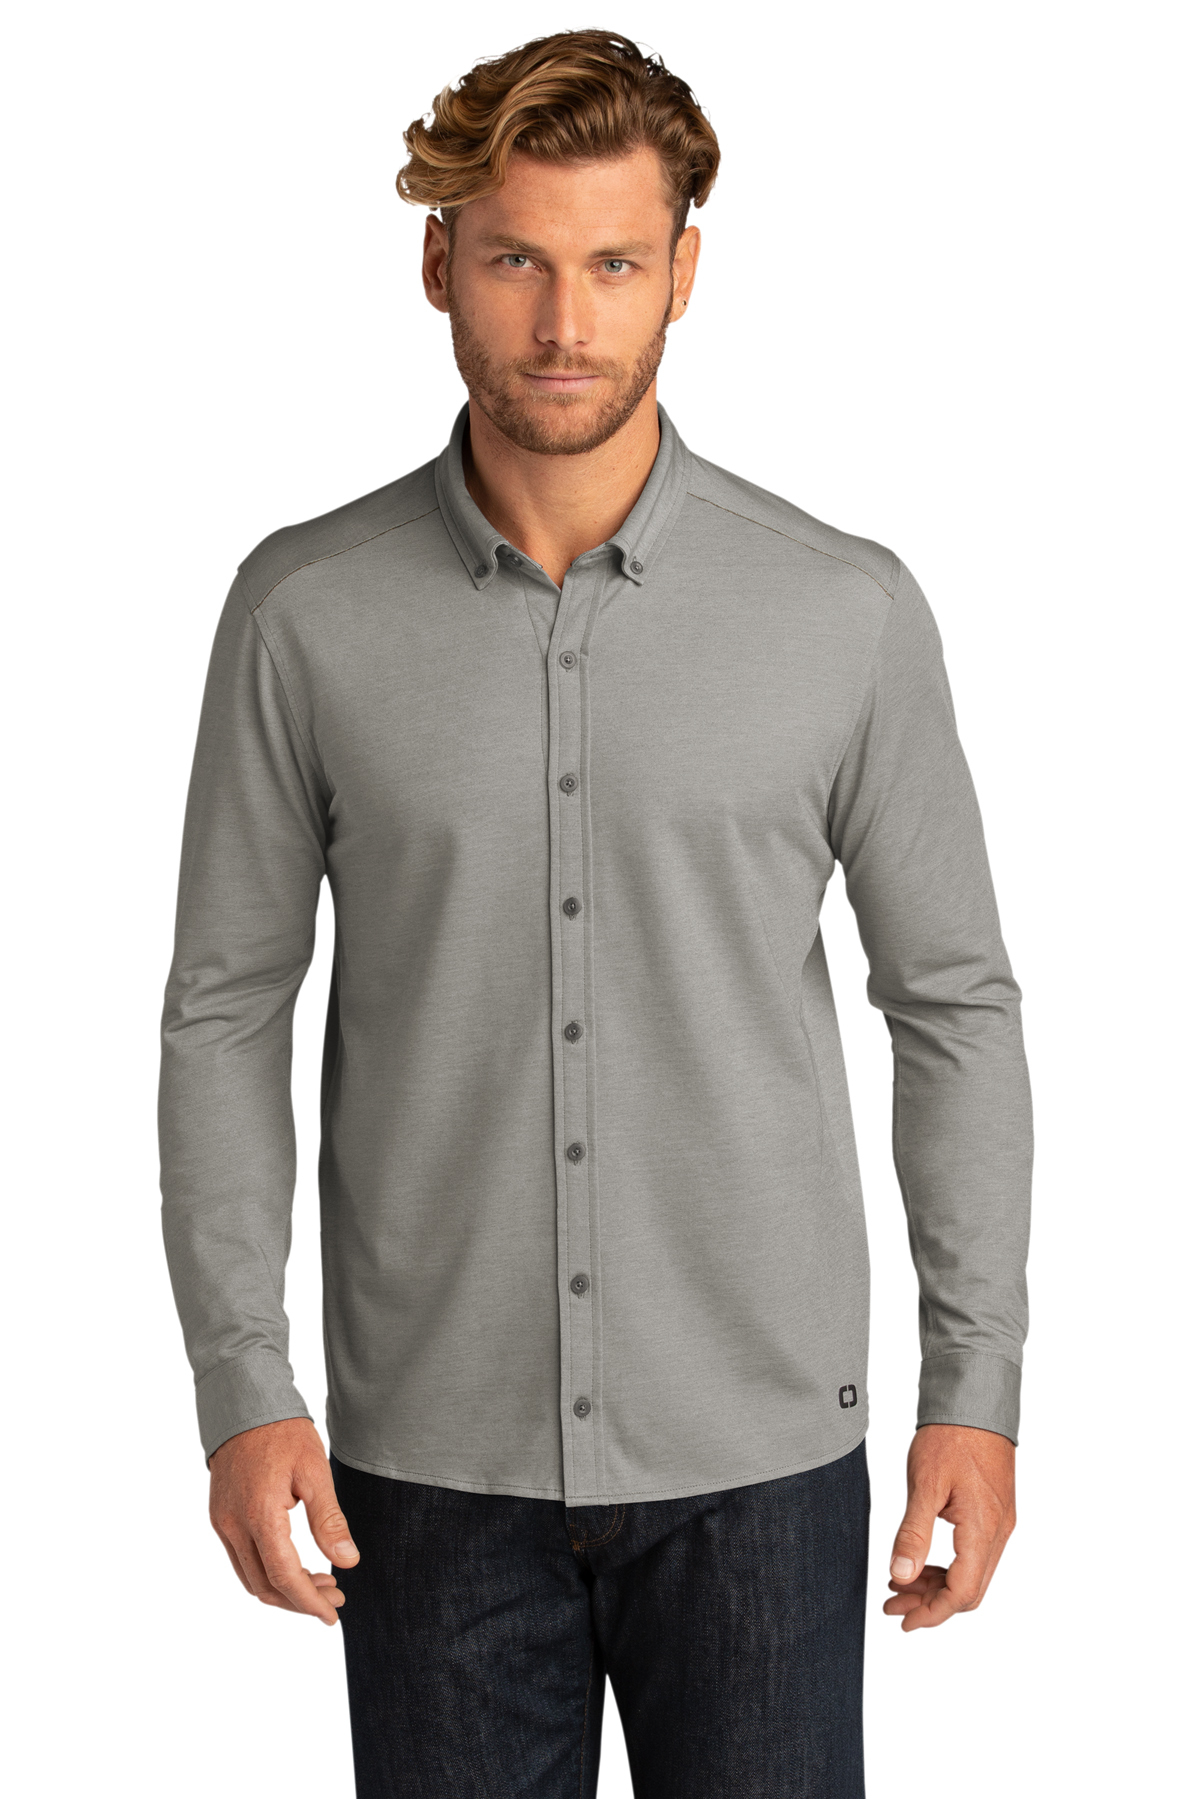 OGIO Code Stretch Long Sleeve Button-Up, Product